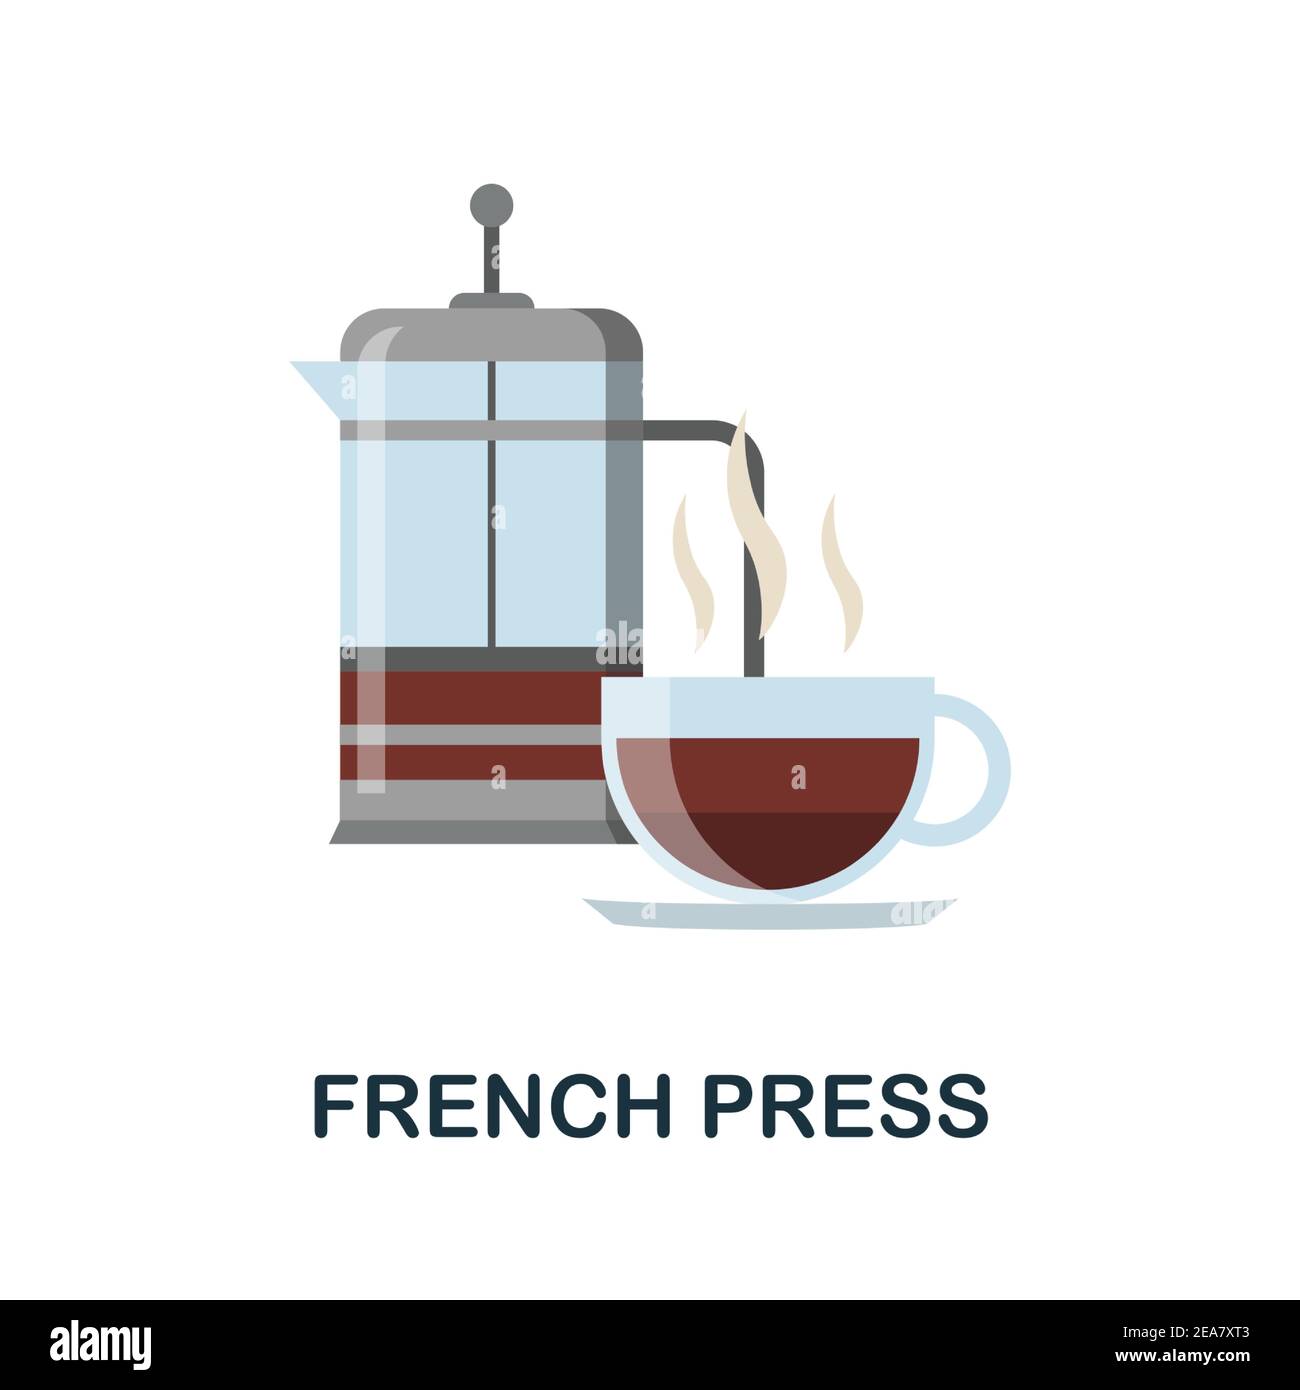 https://c8.alamy.com/comp/2EA7XT3/french-press-flat-icon-color-simple-element-from-coffee-collection-creative-french-press-icon-for-web-design-templates-infographics-and-more-2EA7XT3.jpg